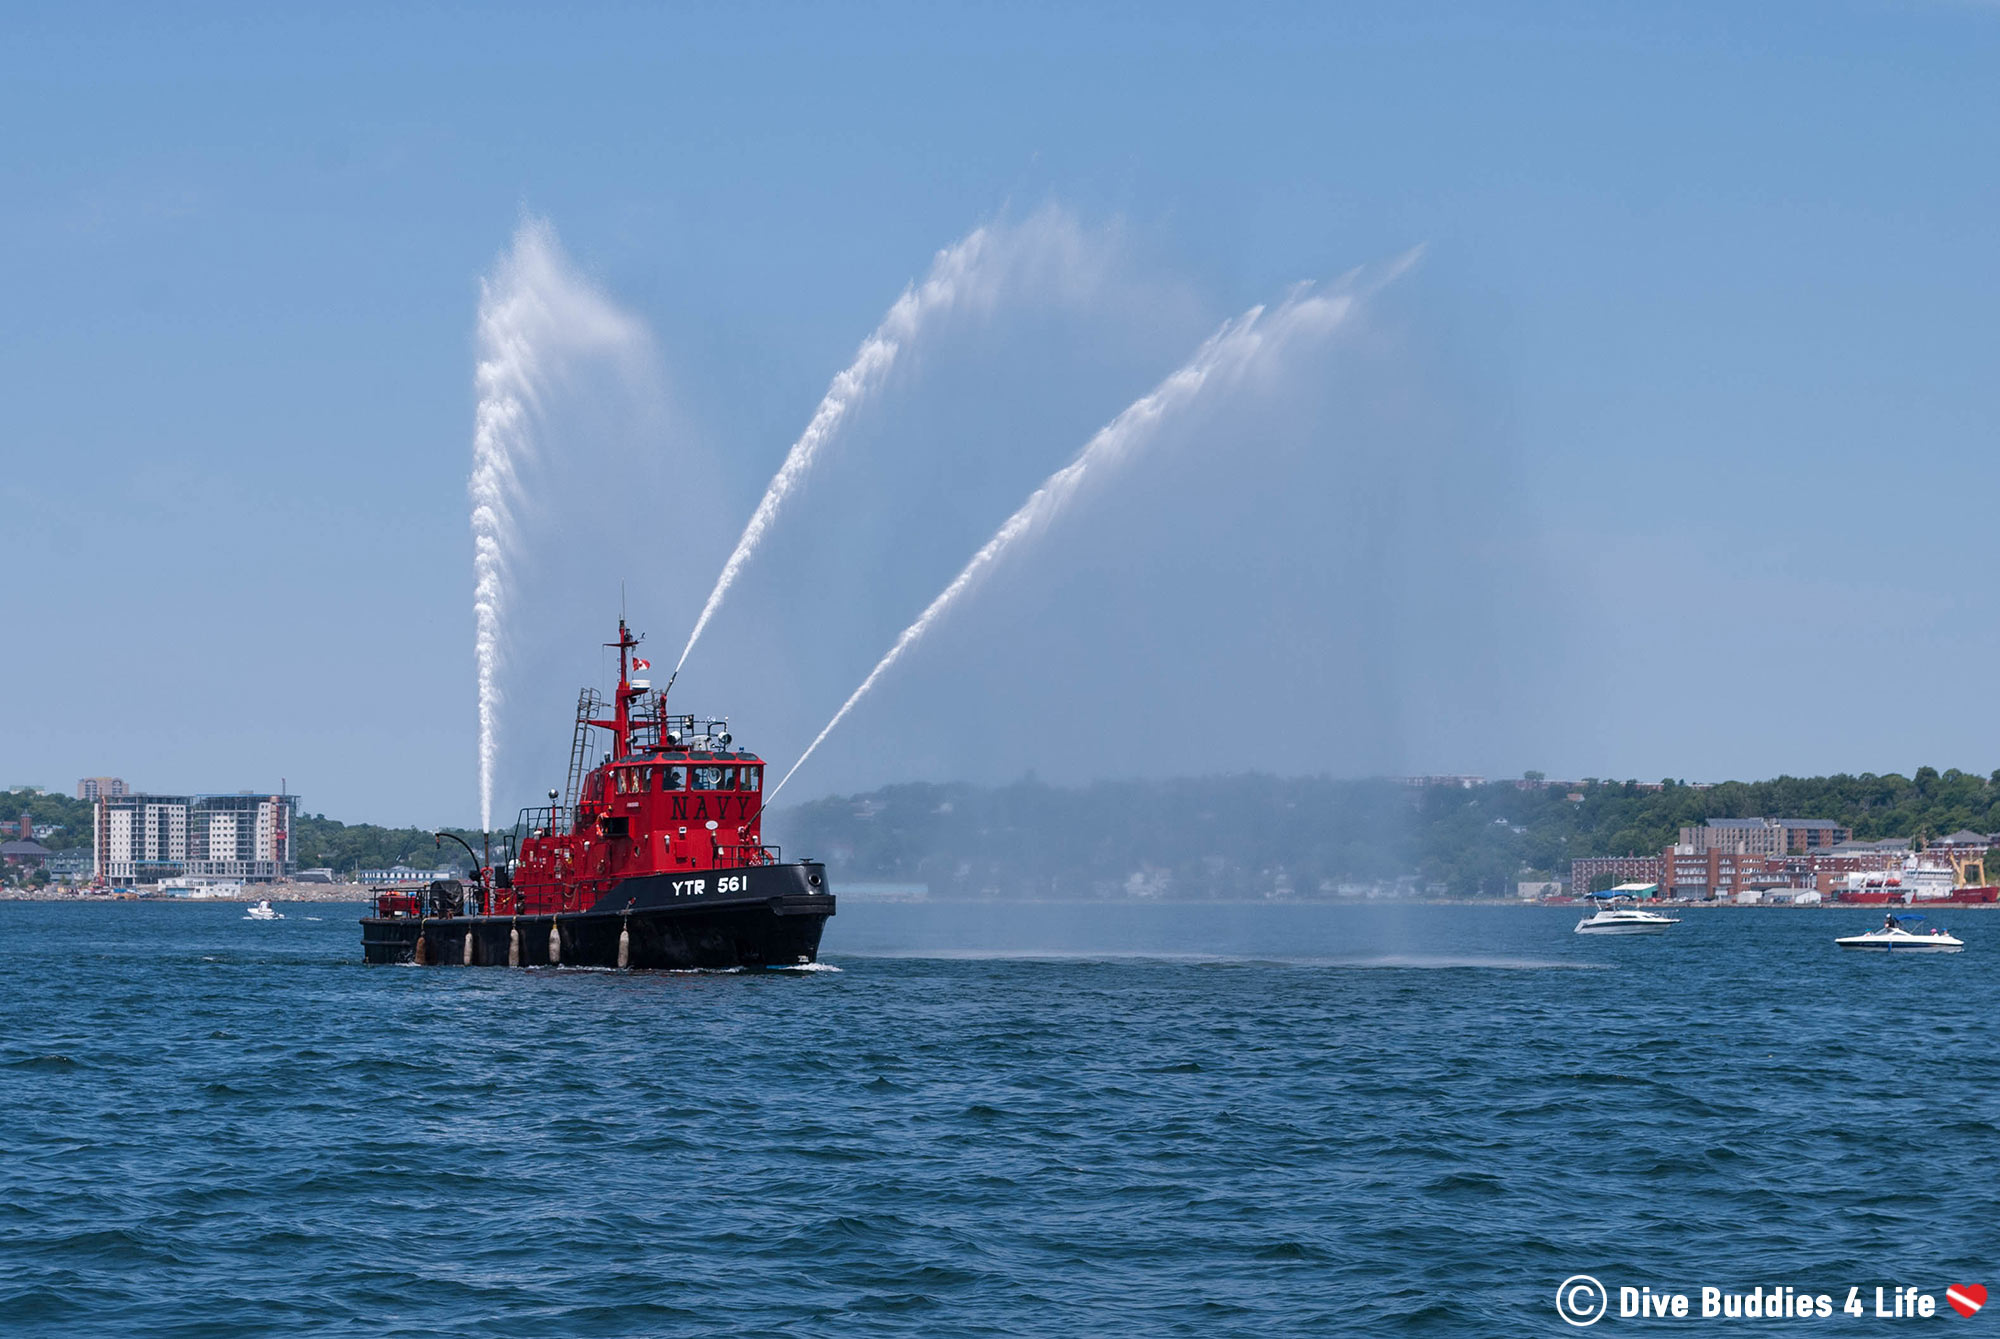 A Navy Boat Spraying Water Across The Halifax Harbour, Canada